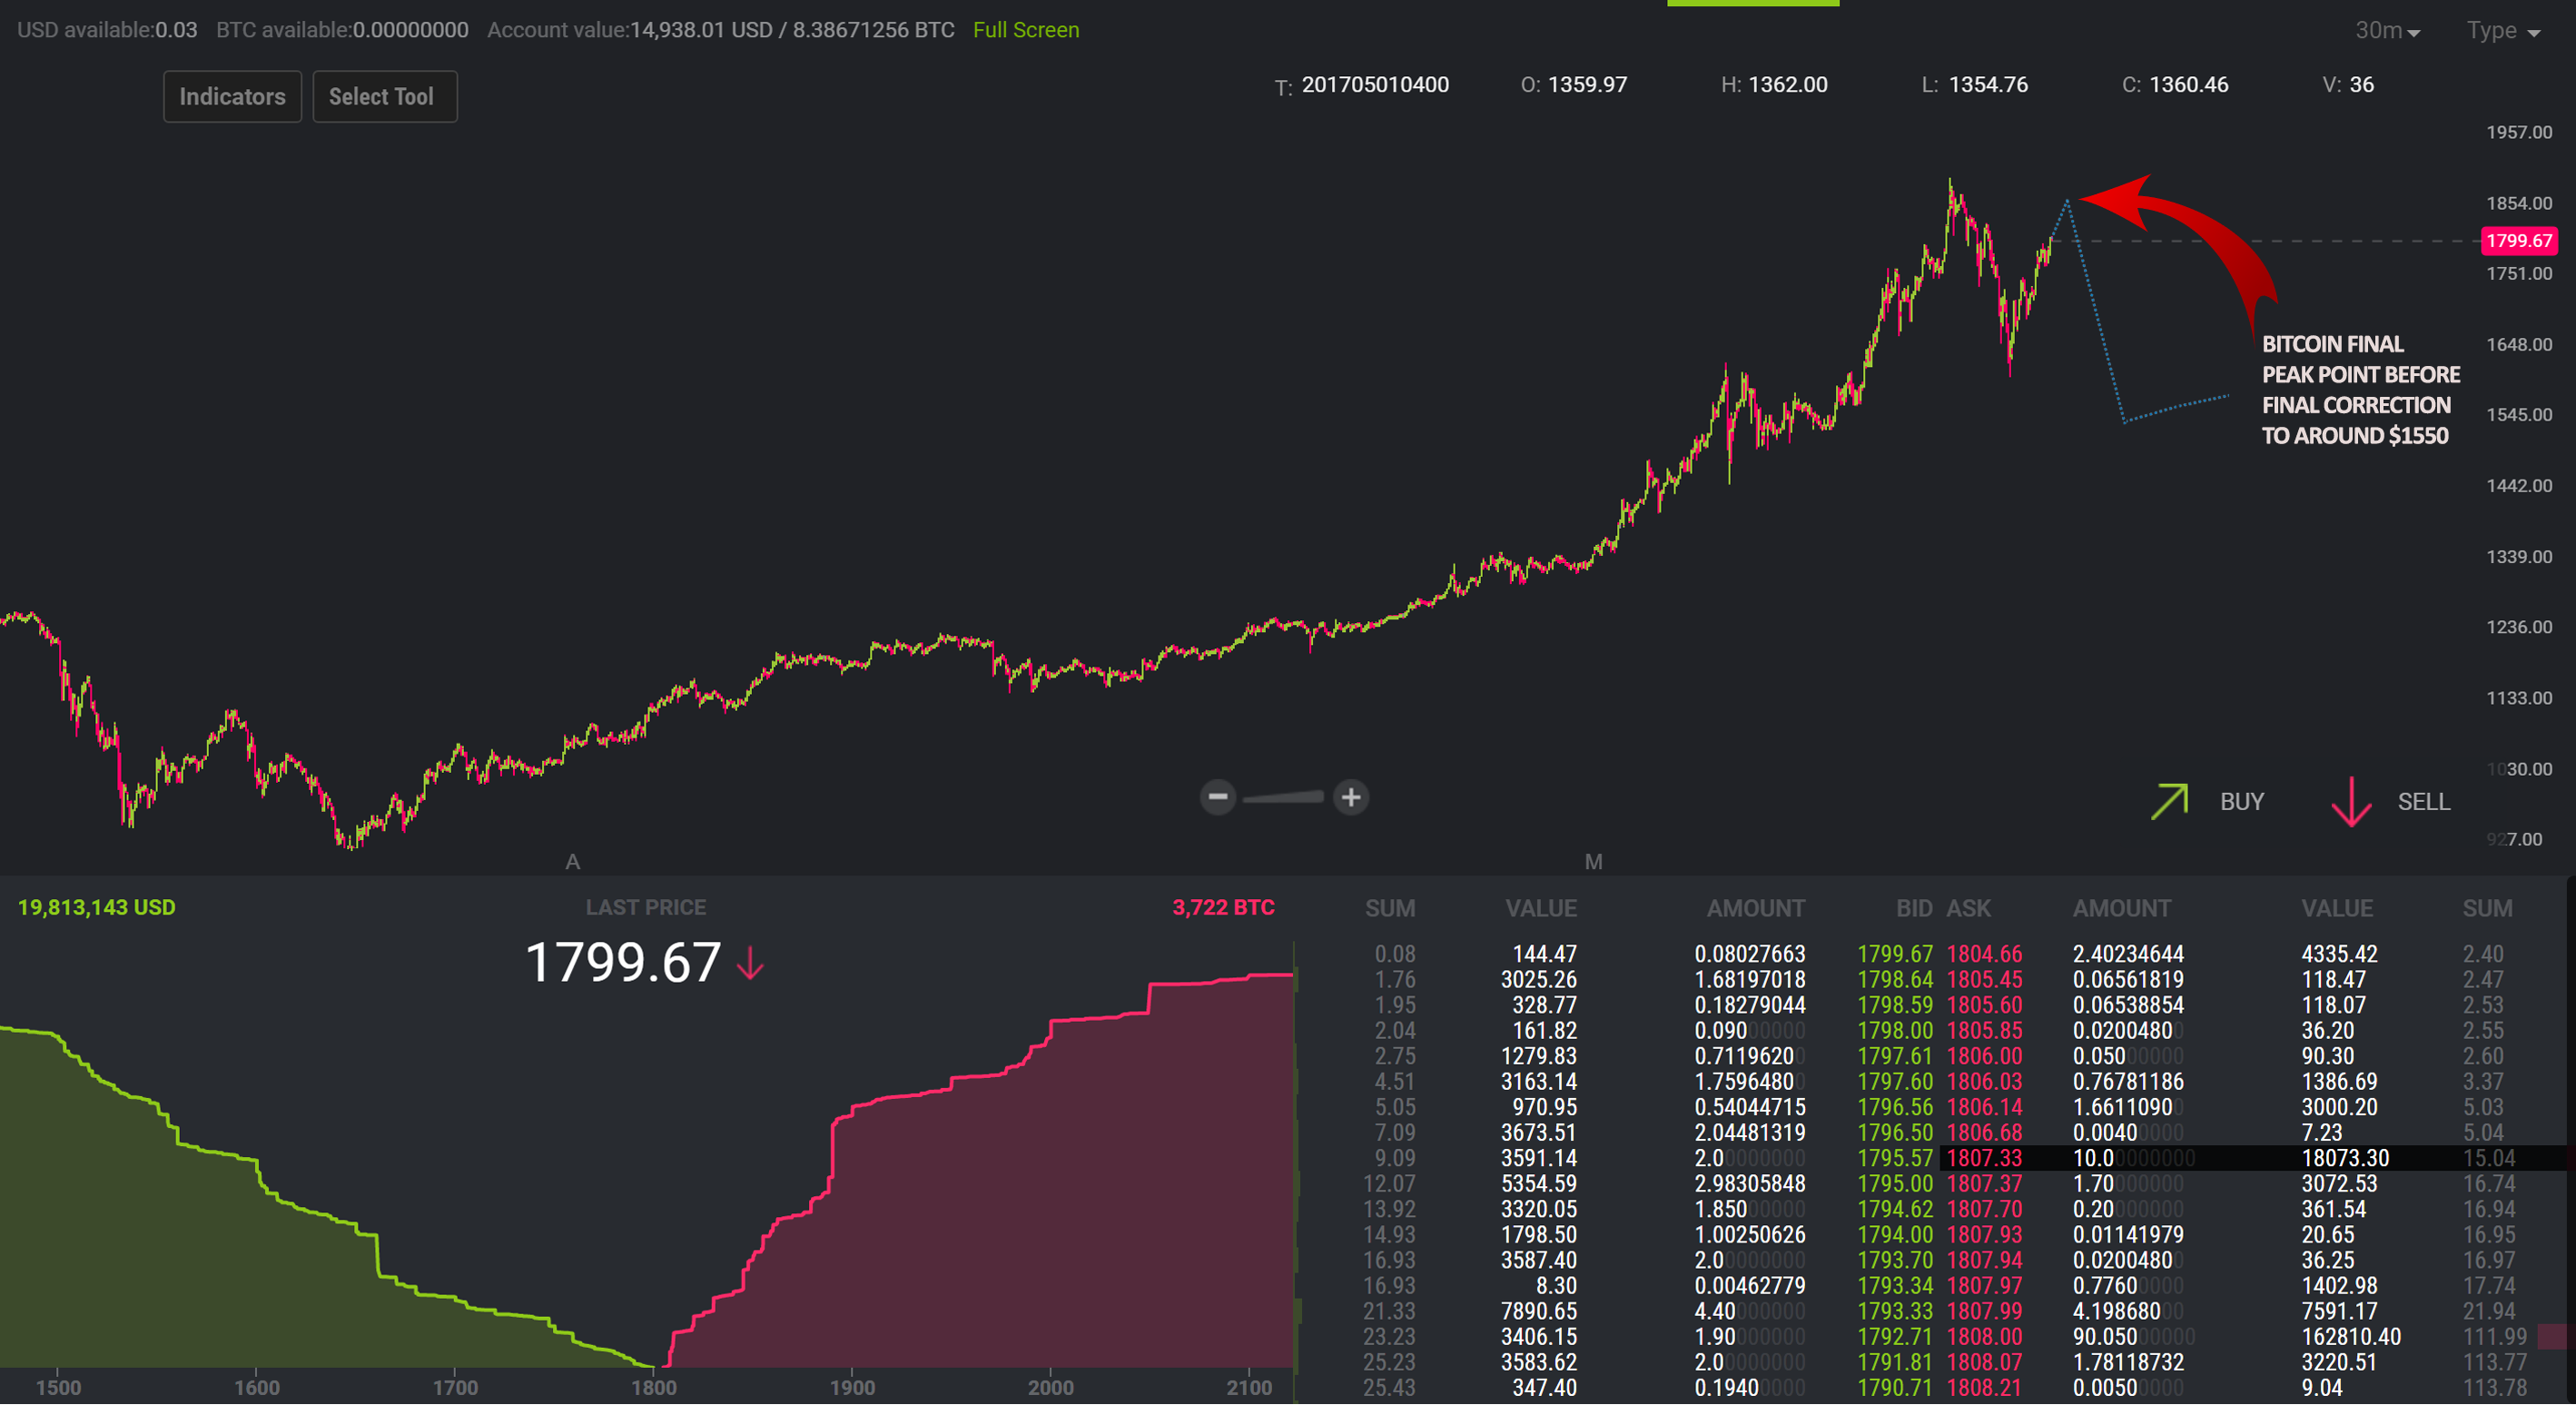 Bitcoin Price Prediction Over Next 6 24 Hours Whats Your - 